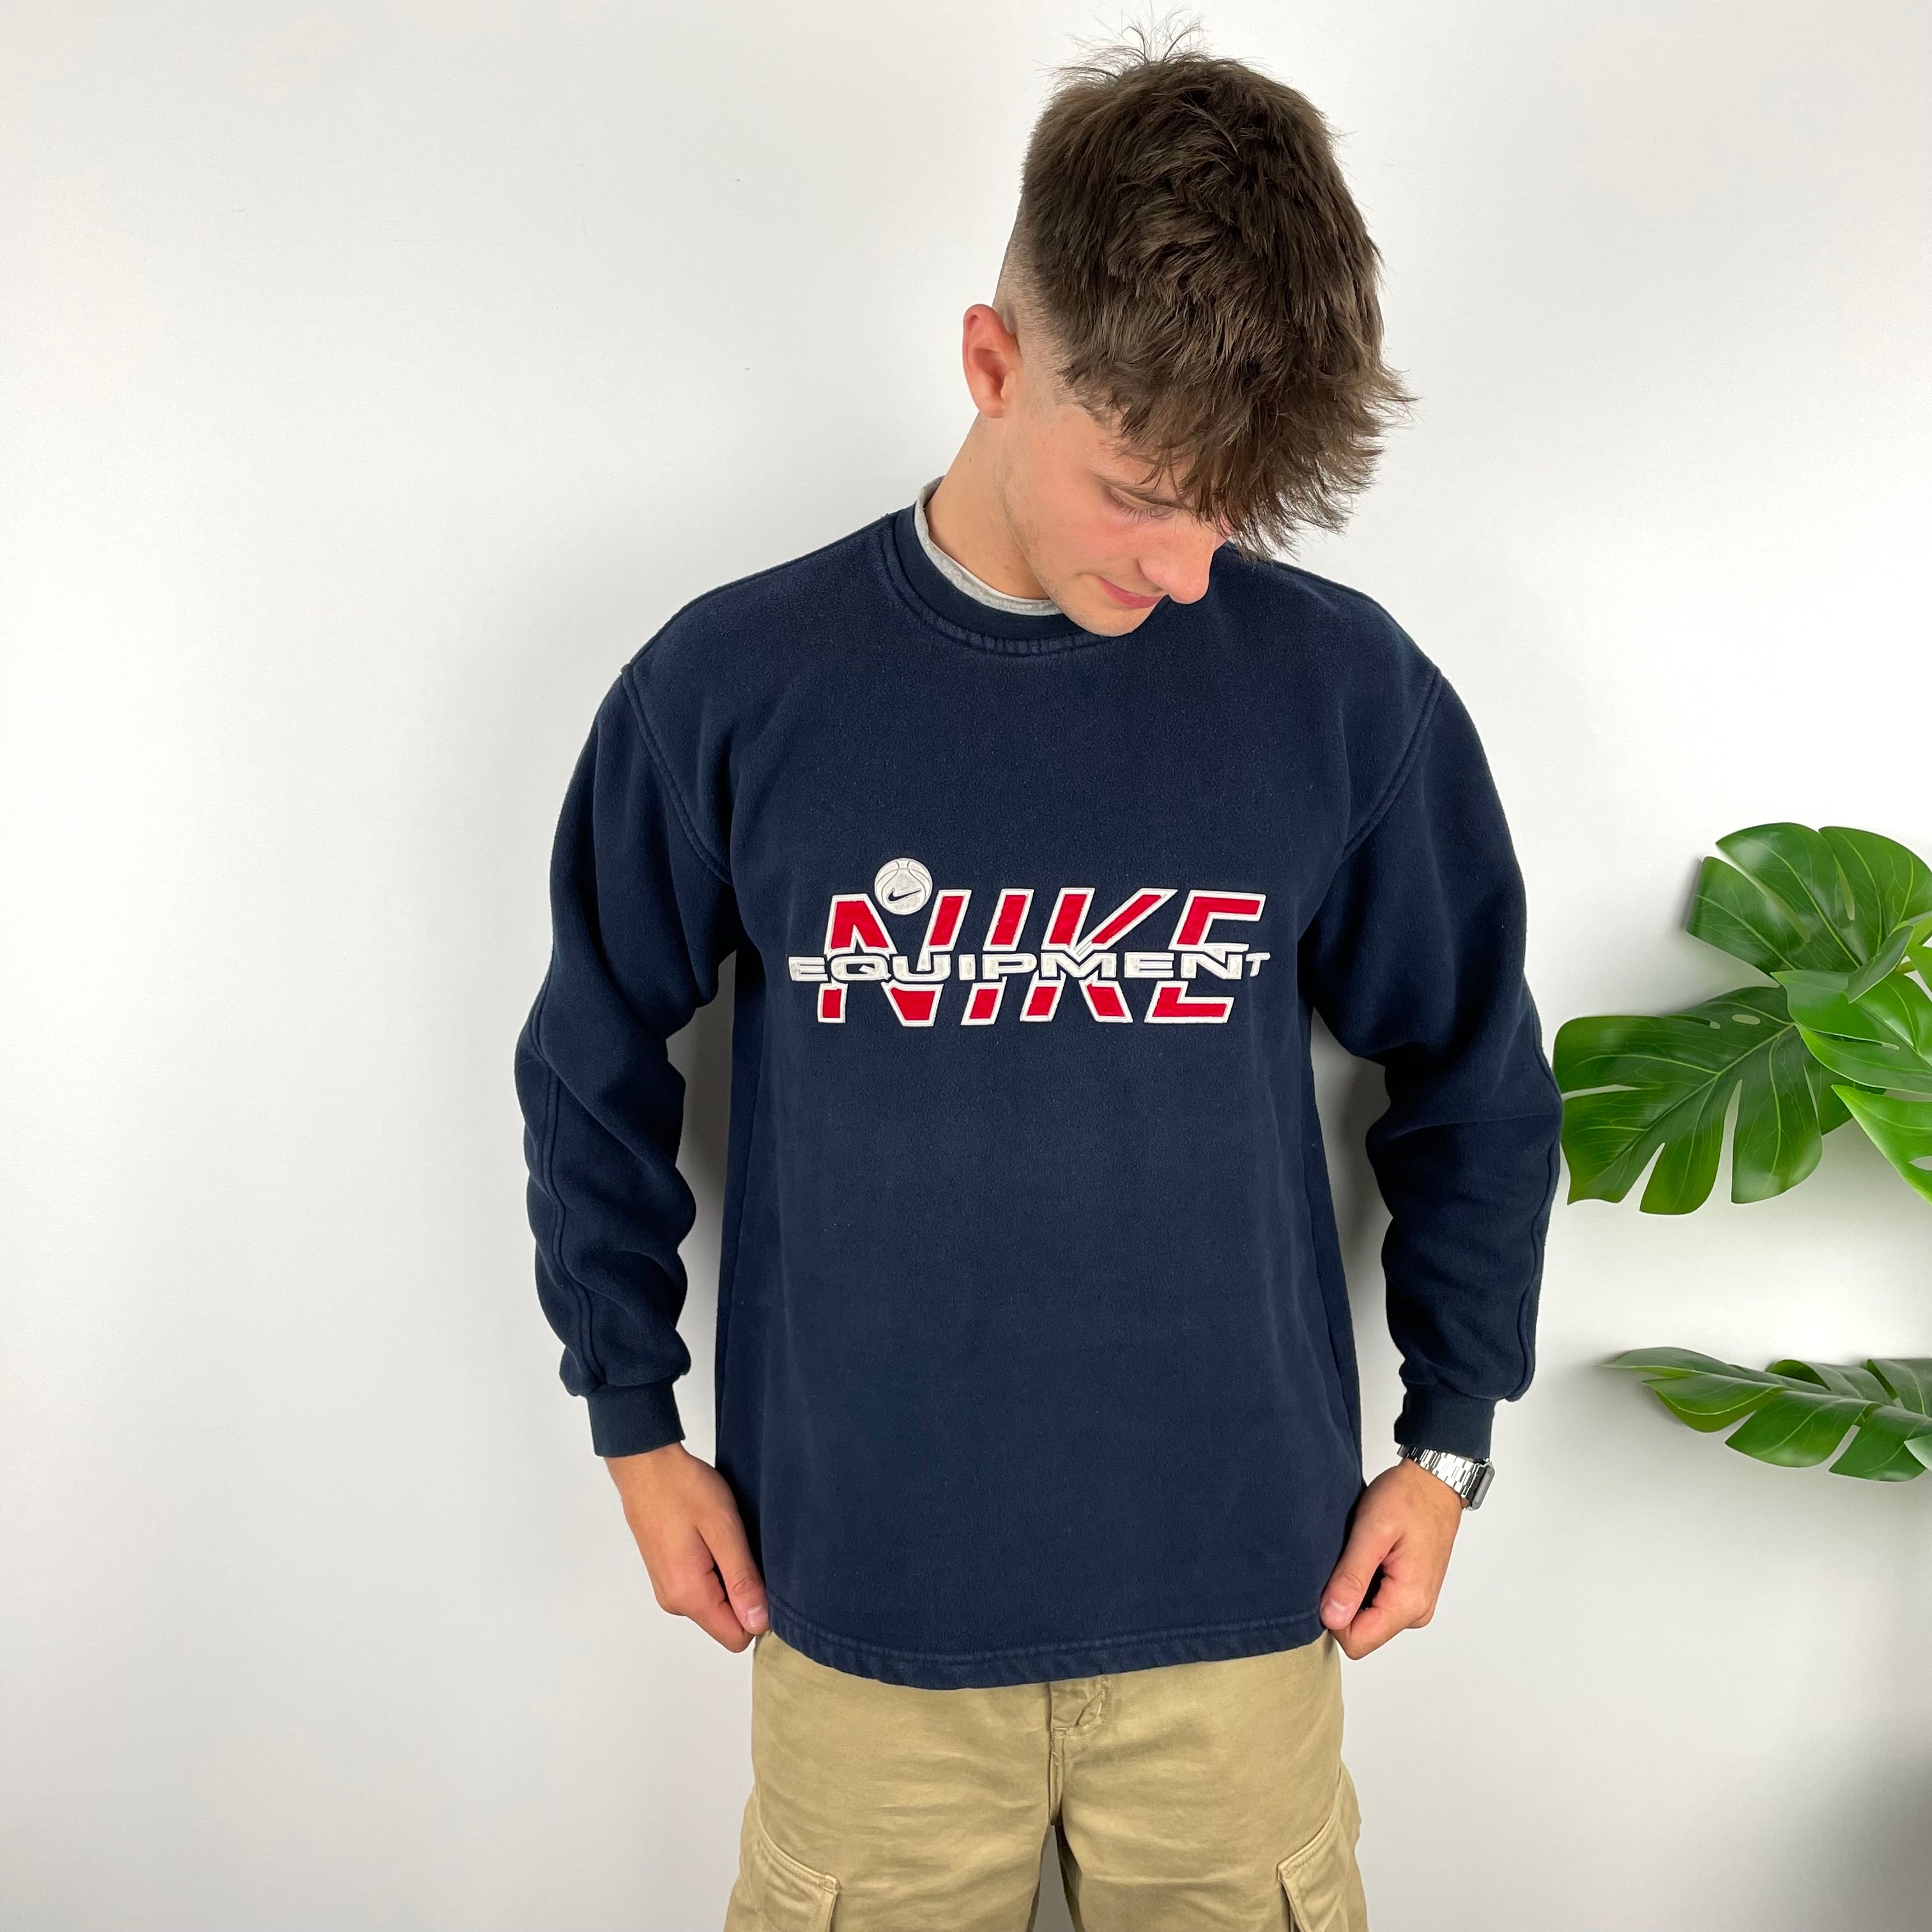 Nike Equipment RARE Navy Embroidered Spell Out Sweatshirt (L)